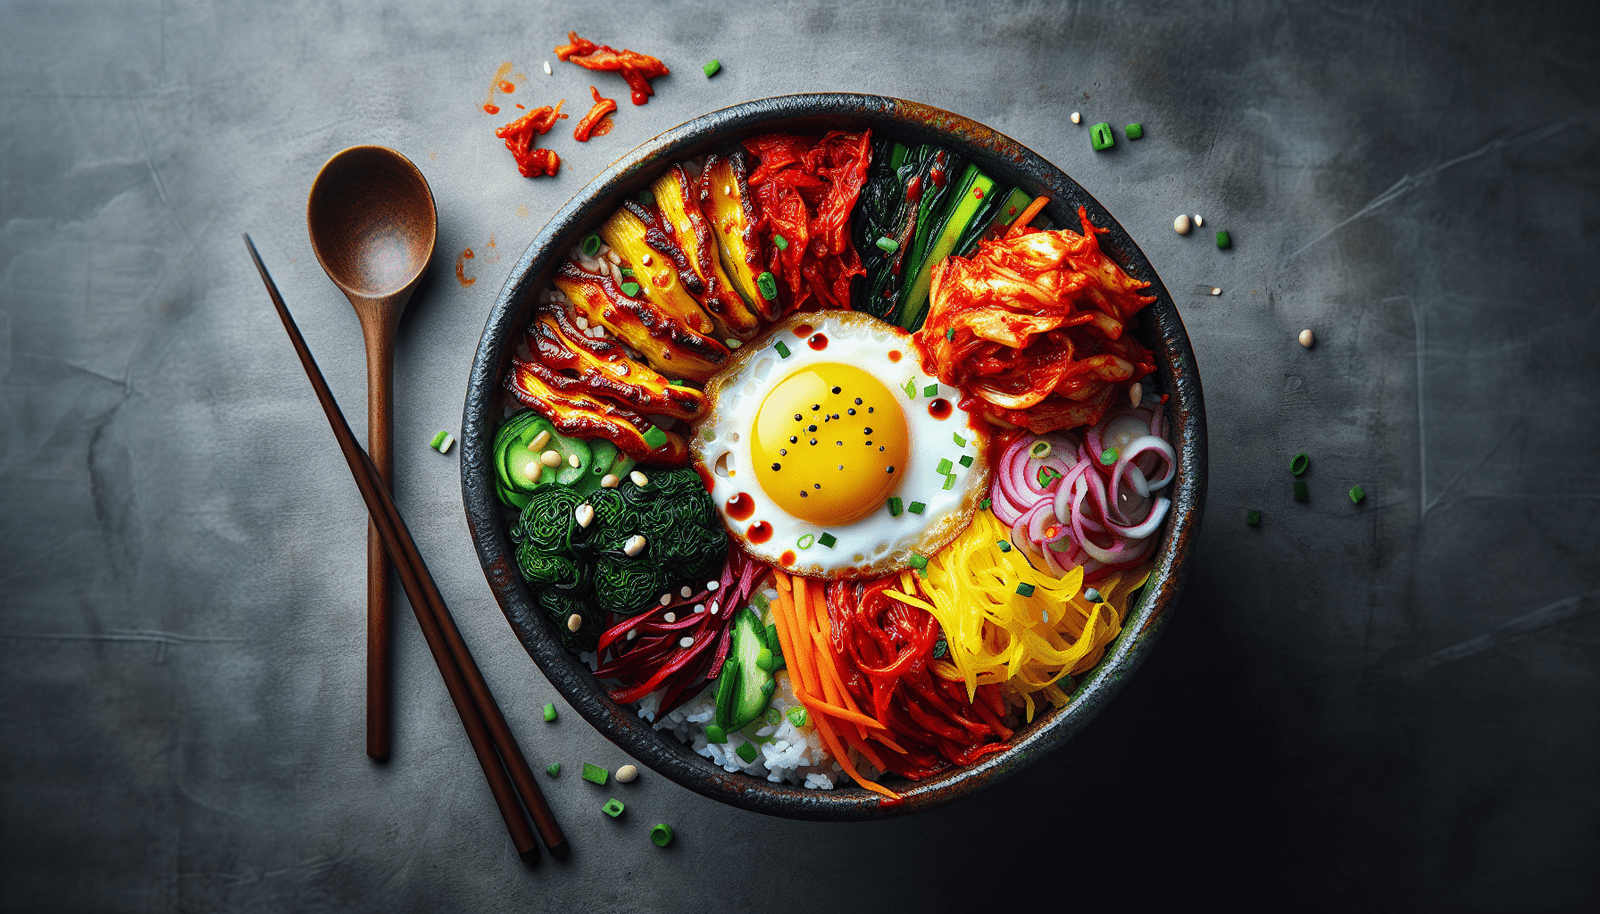 Can You Recommend Trending Recipes For Korean-inspired Breakfast Bowls?